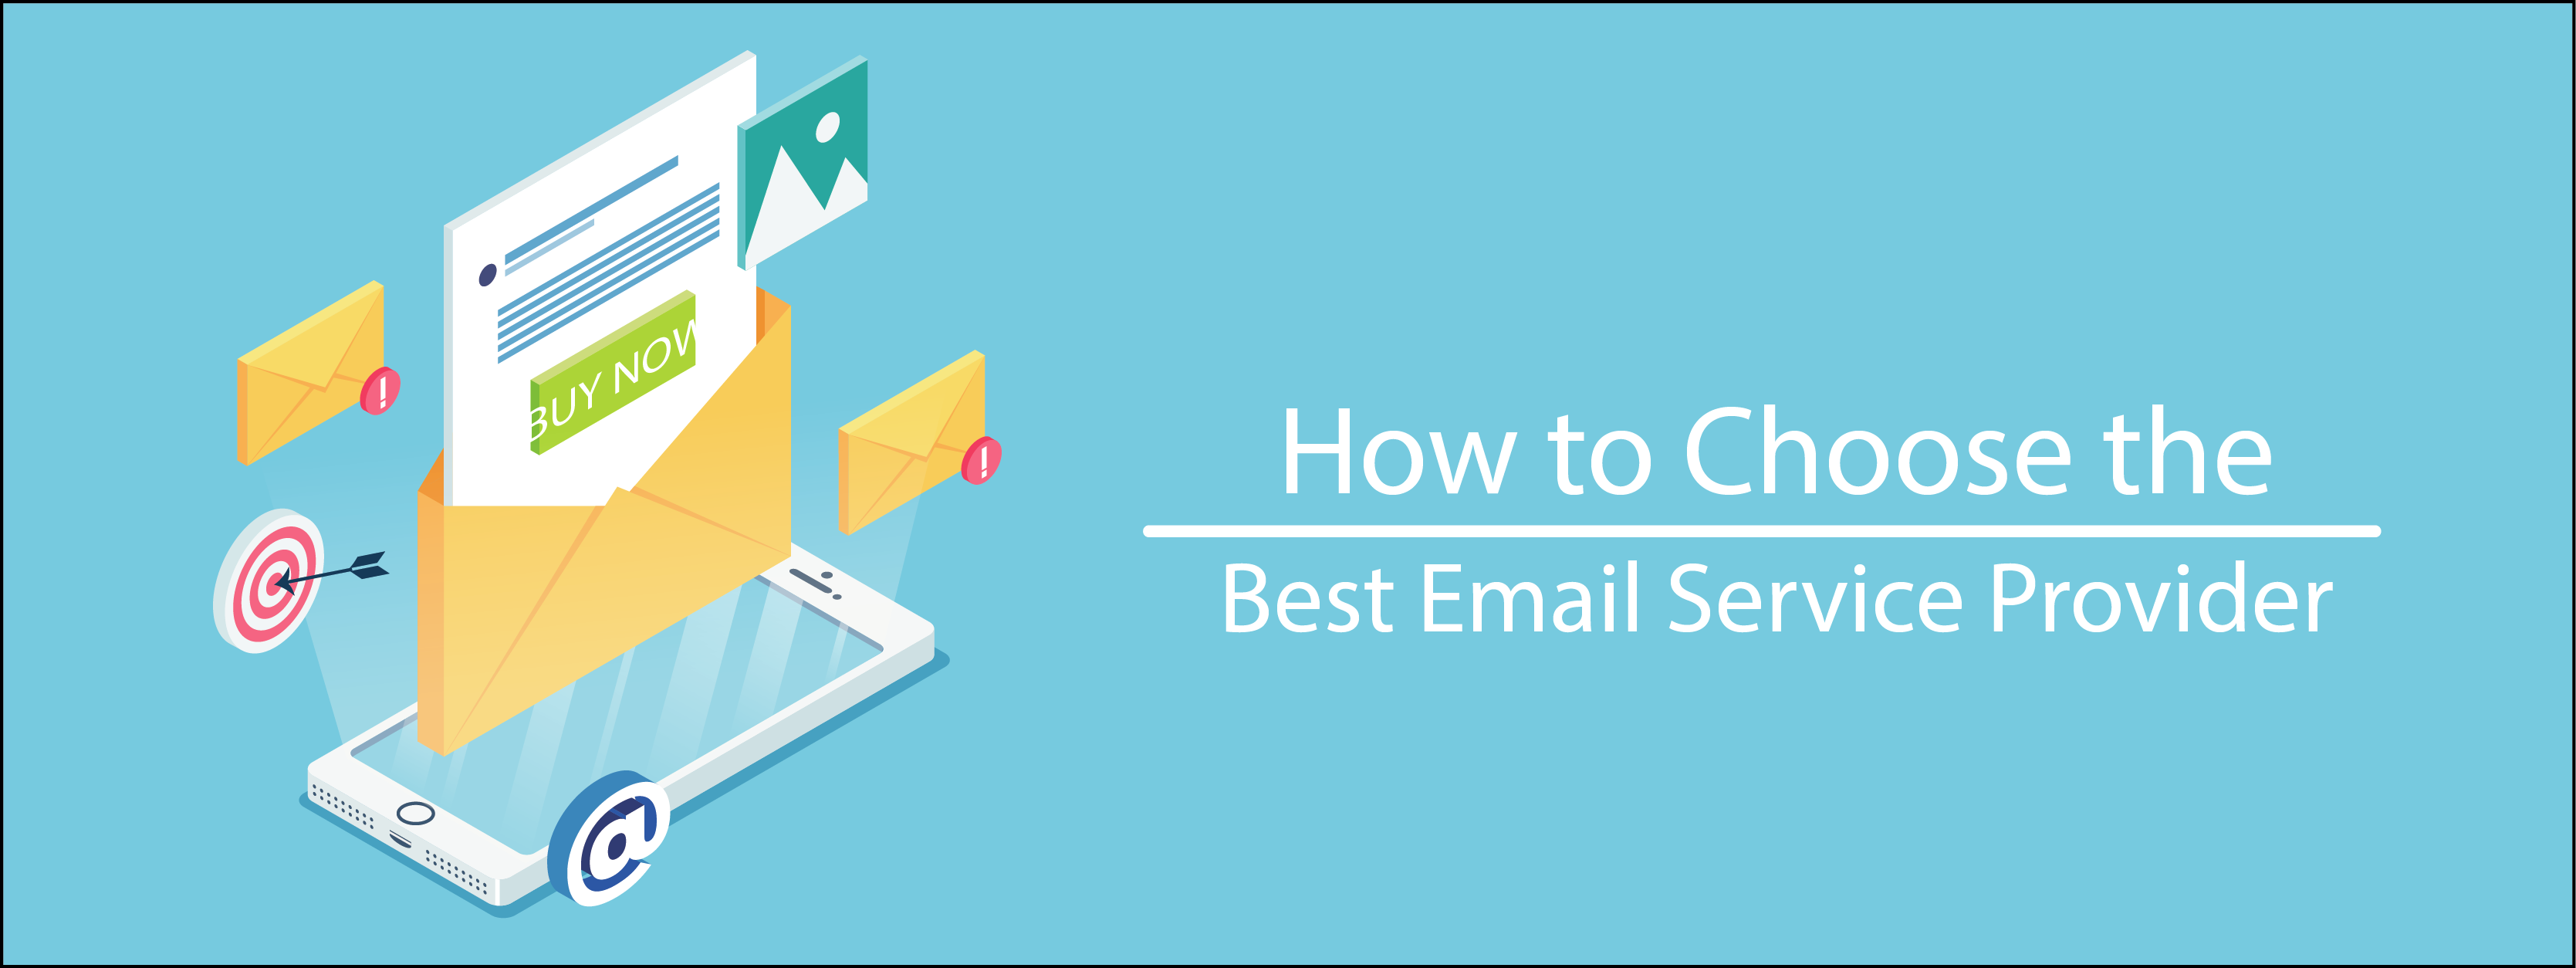 how to choose the best email service provider